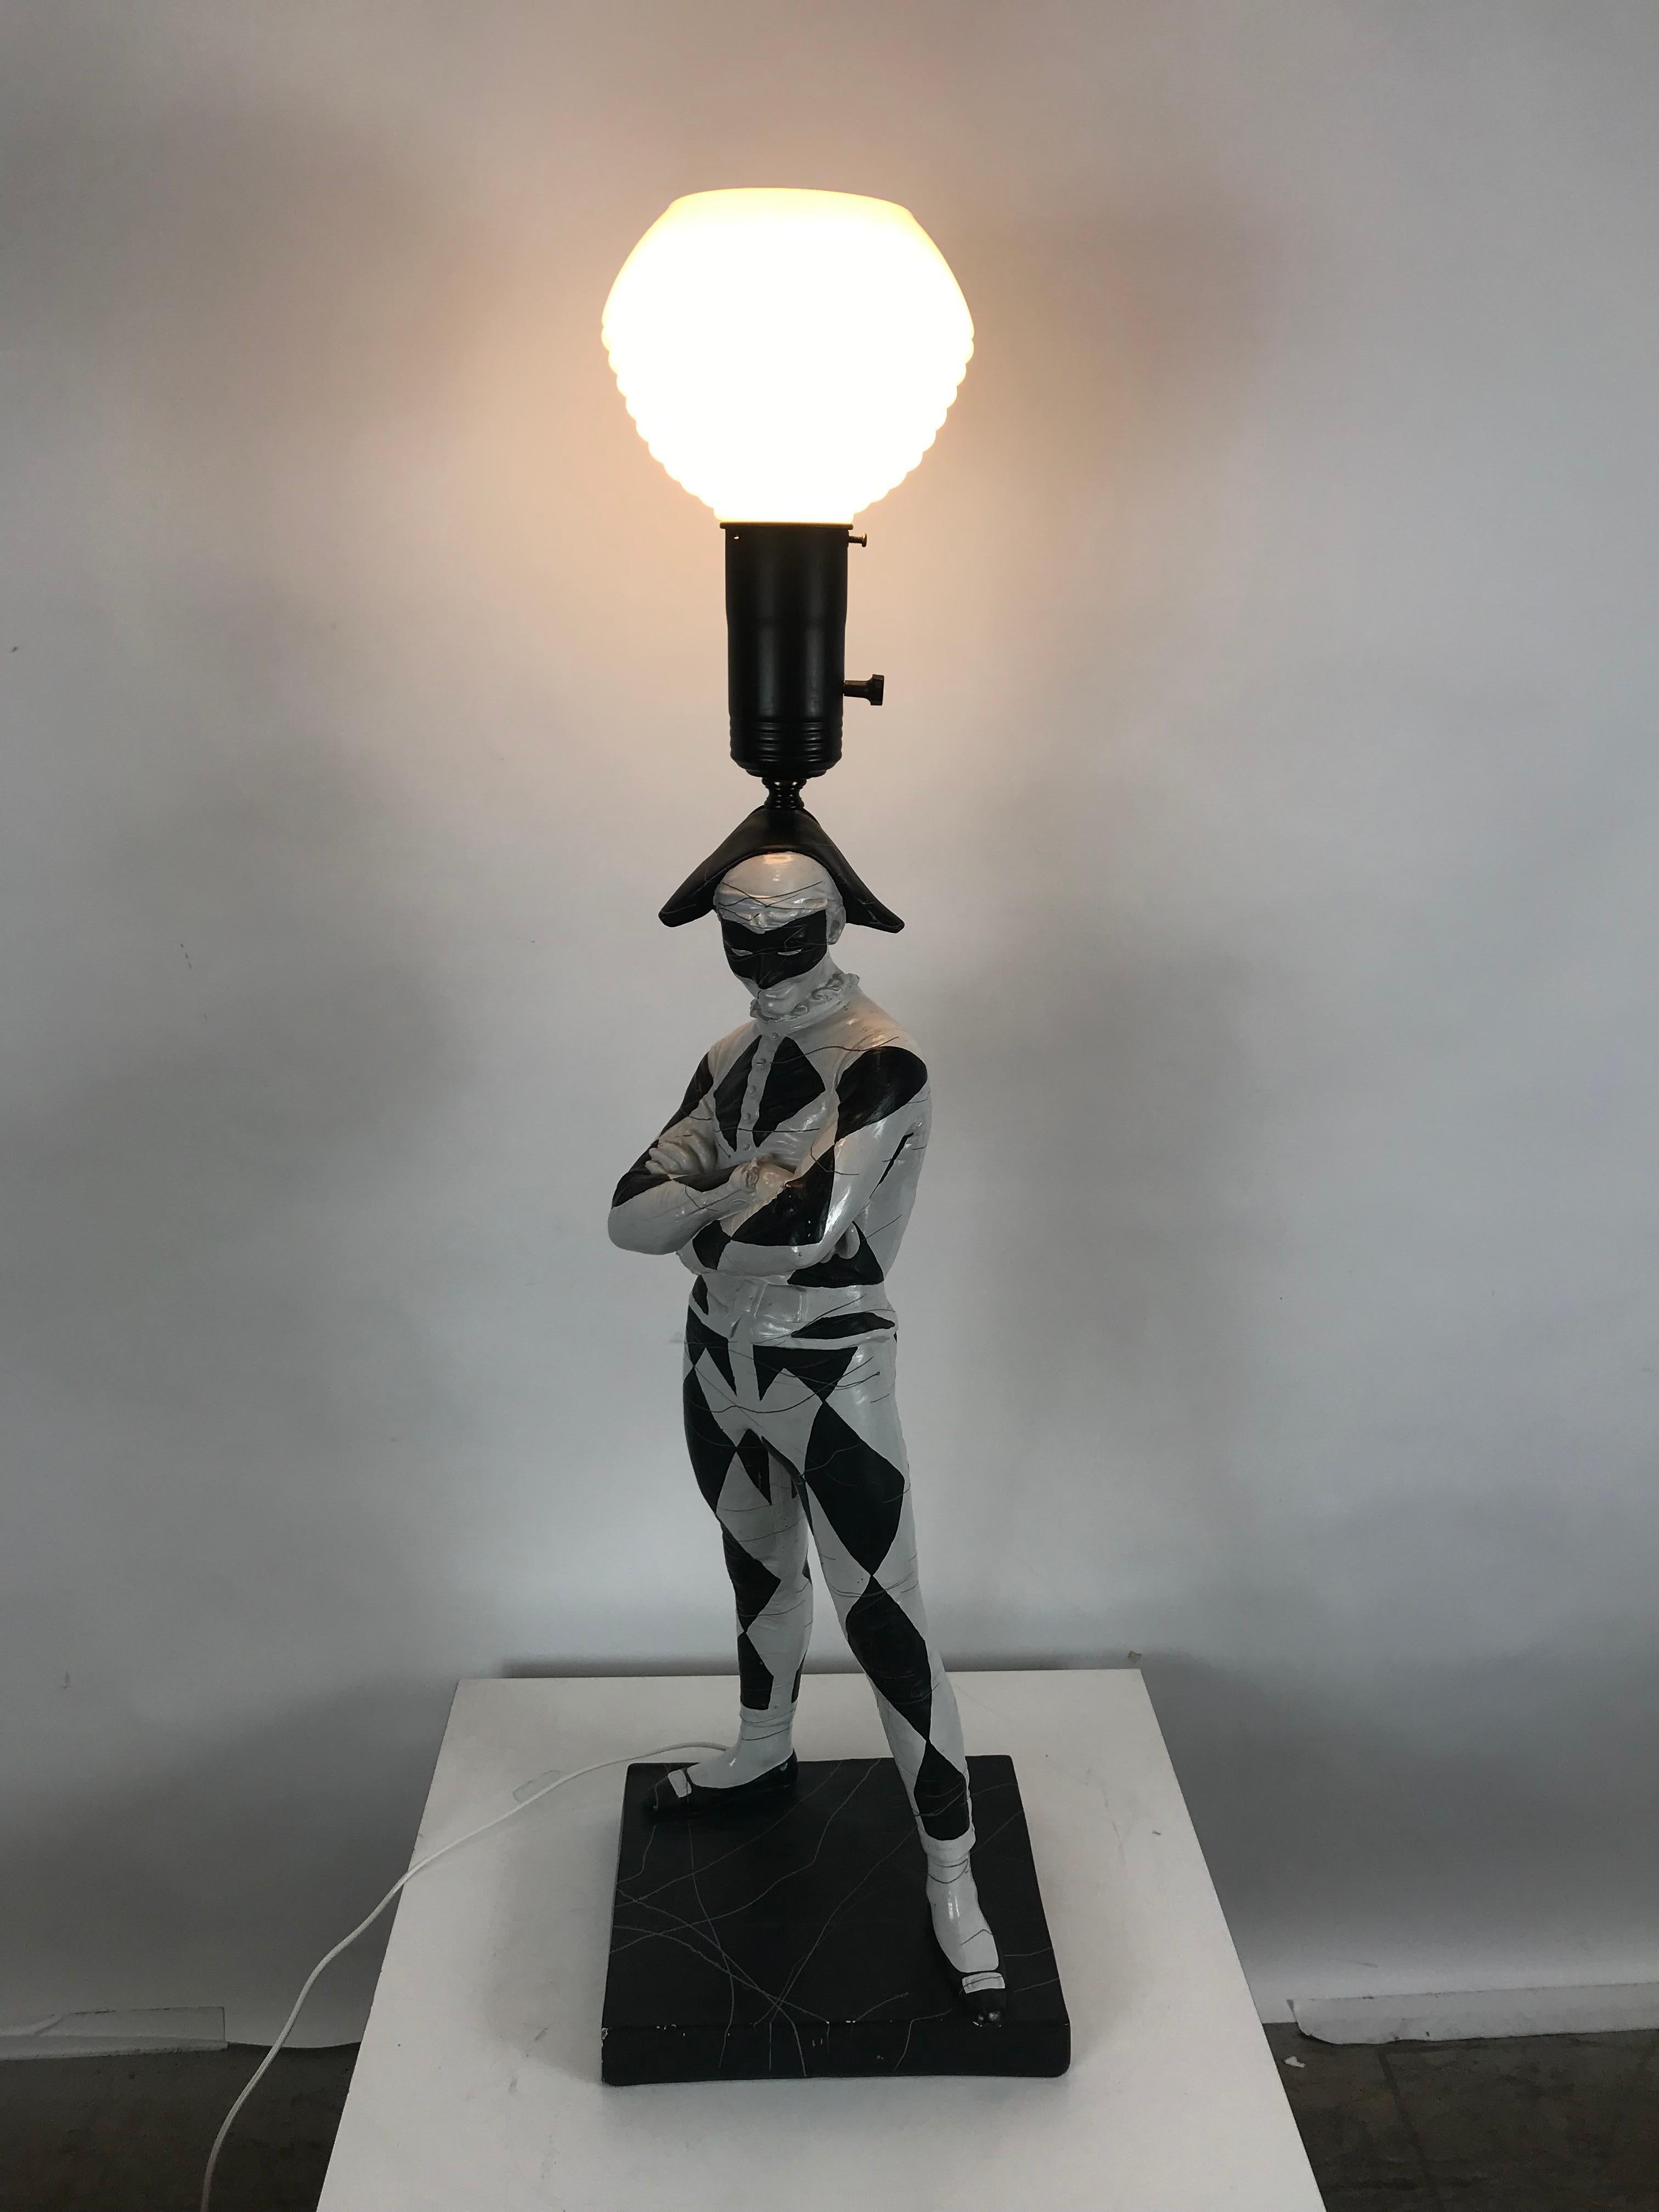 Large Mid-Century Modern plaster lamp, court jester by G. W, Hamilton. Hand painted plaster harelequin modeled after a famous life-size marble sculpture by Rene de Saint Marceaux located in France. Retains original lamp shade, fits seamlessly into